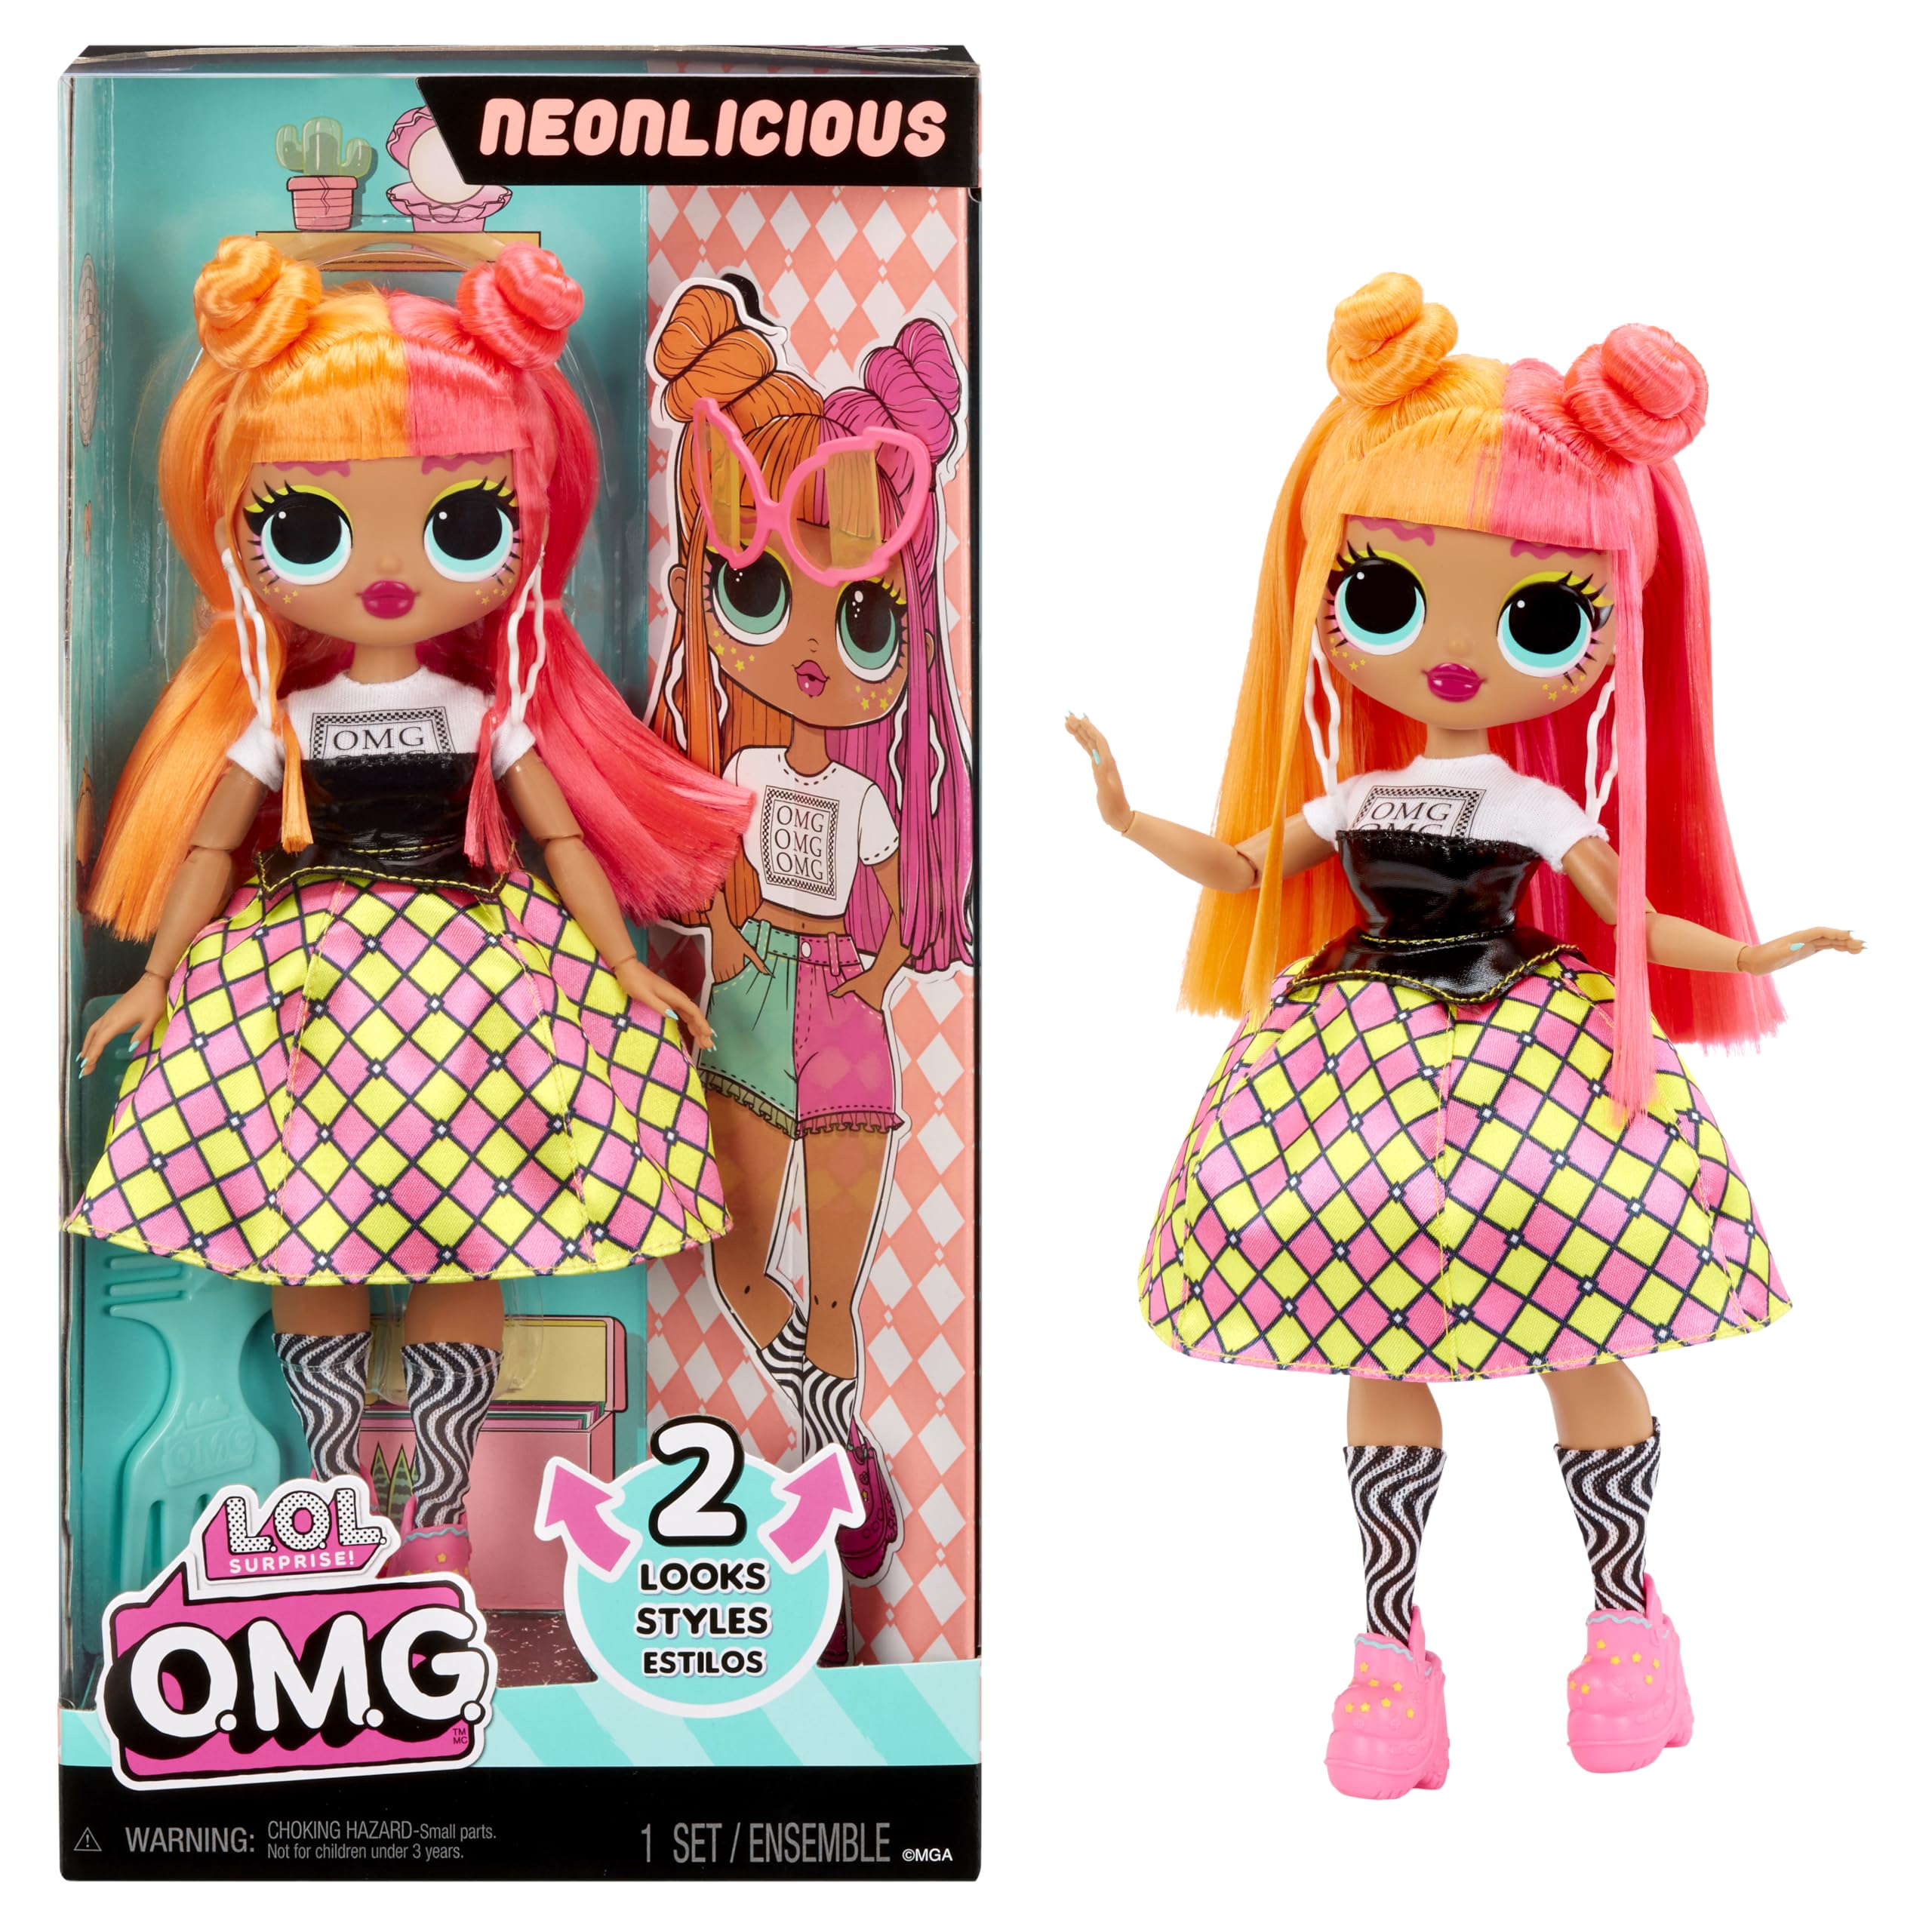 LOL Surprise OMG Neonlicious Fashion Doll with Multiple Surprises Including Transforming Fashions and Fabulous Accessories – Great Gift for Kids Ages 4+